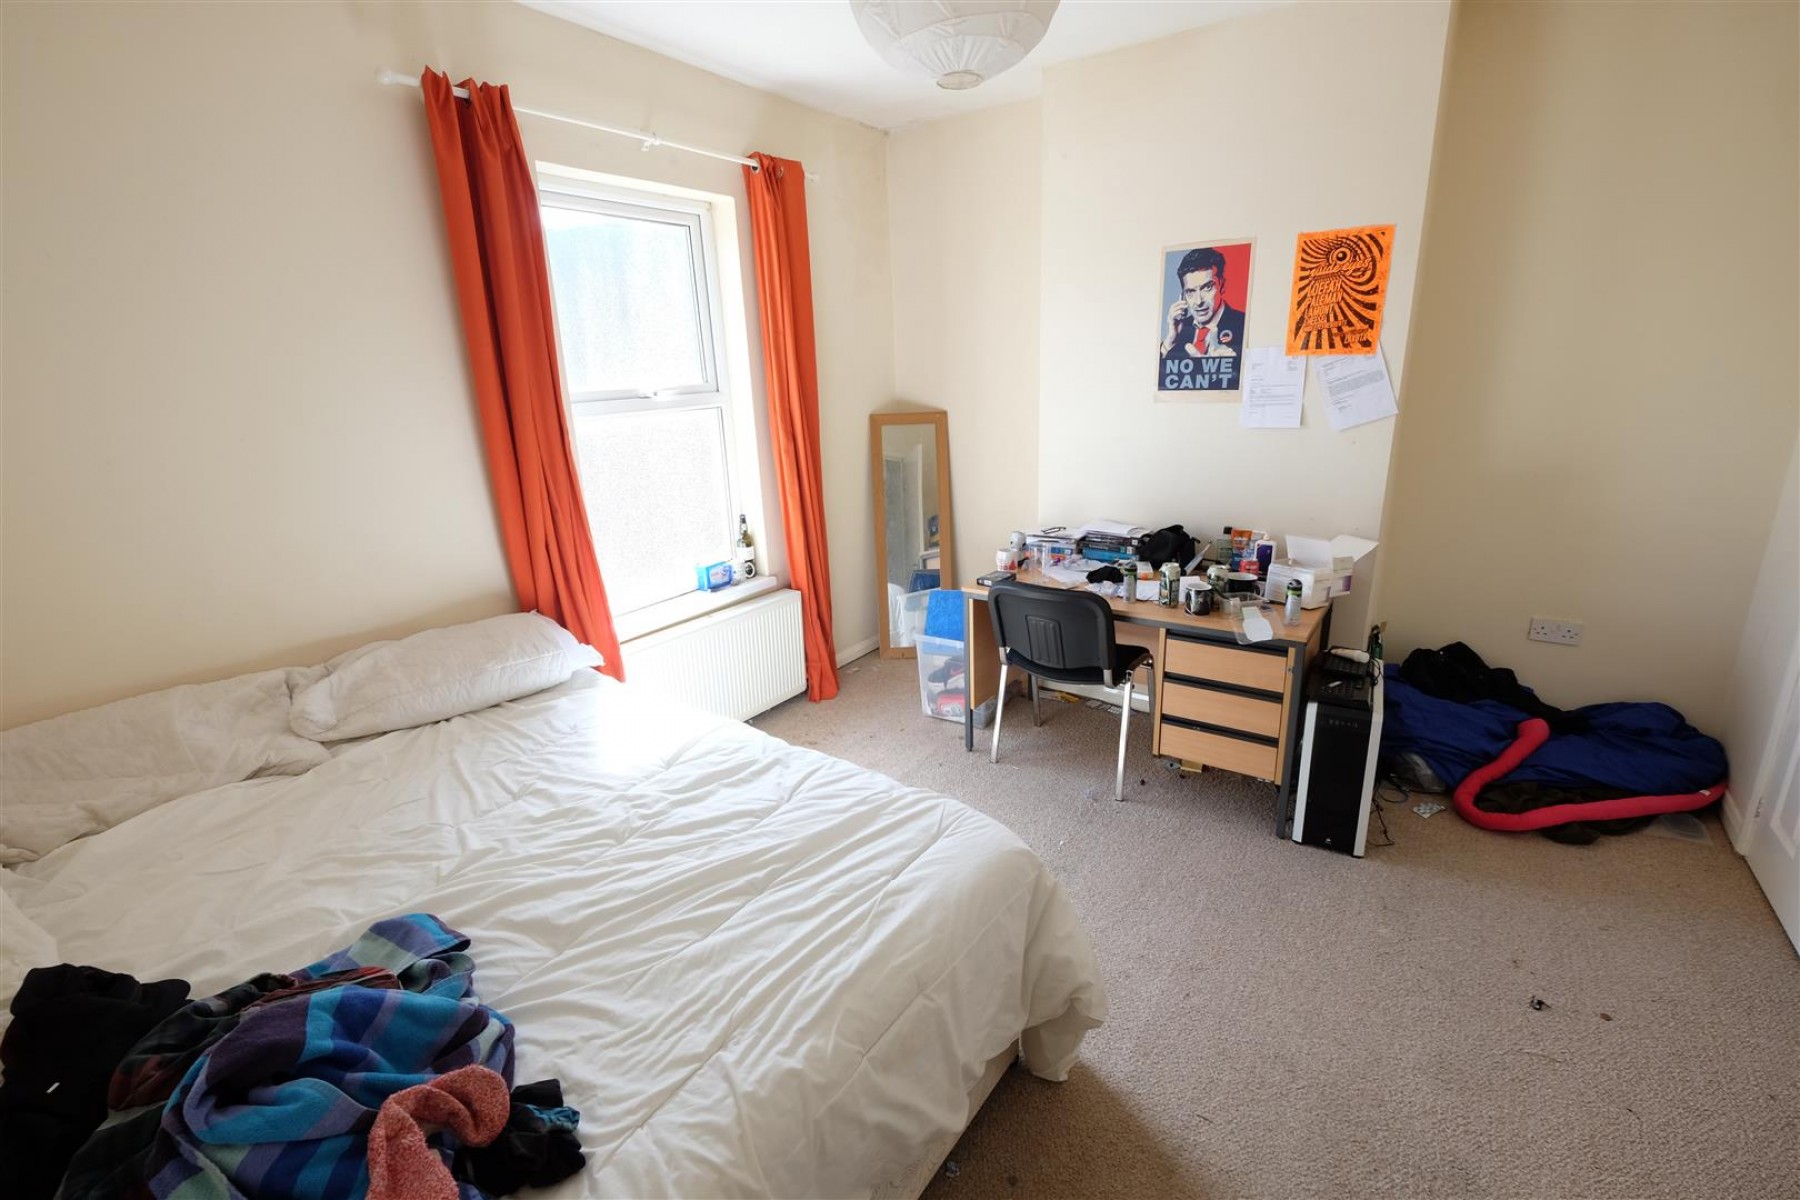 Images for CURRENTLY LET FOR £17k - Goodhind St, Easton